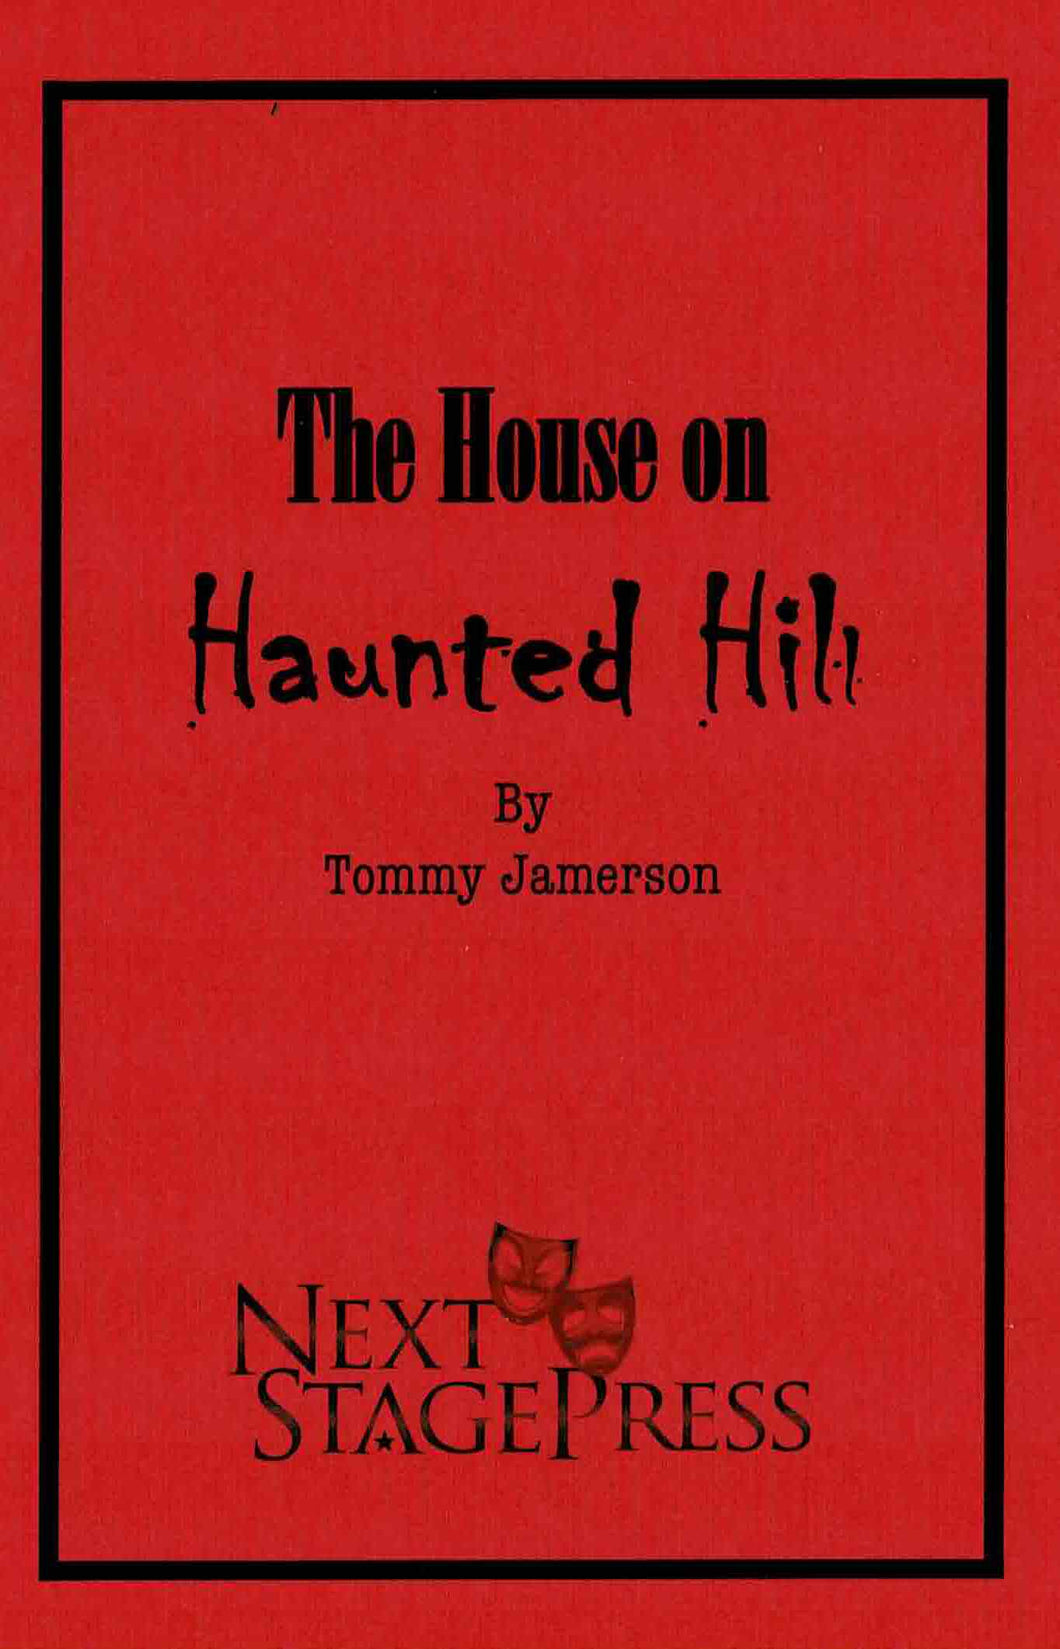 House on Haunted Hill, The by Tommy Jamerson